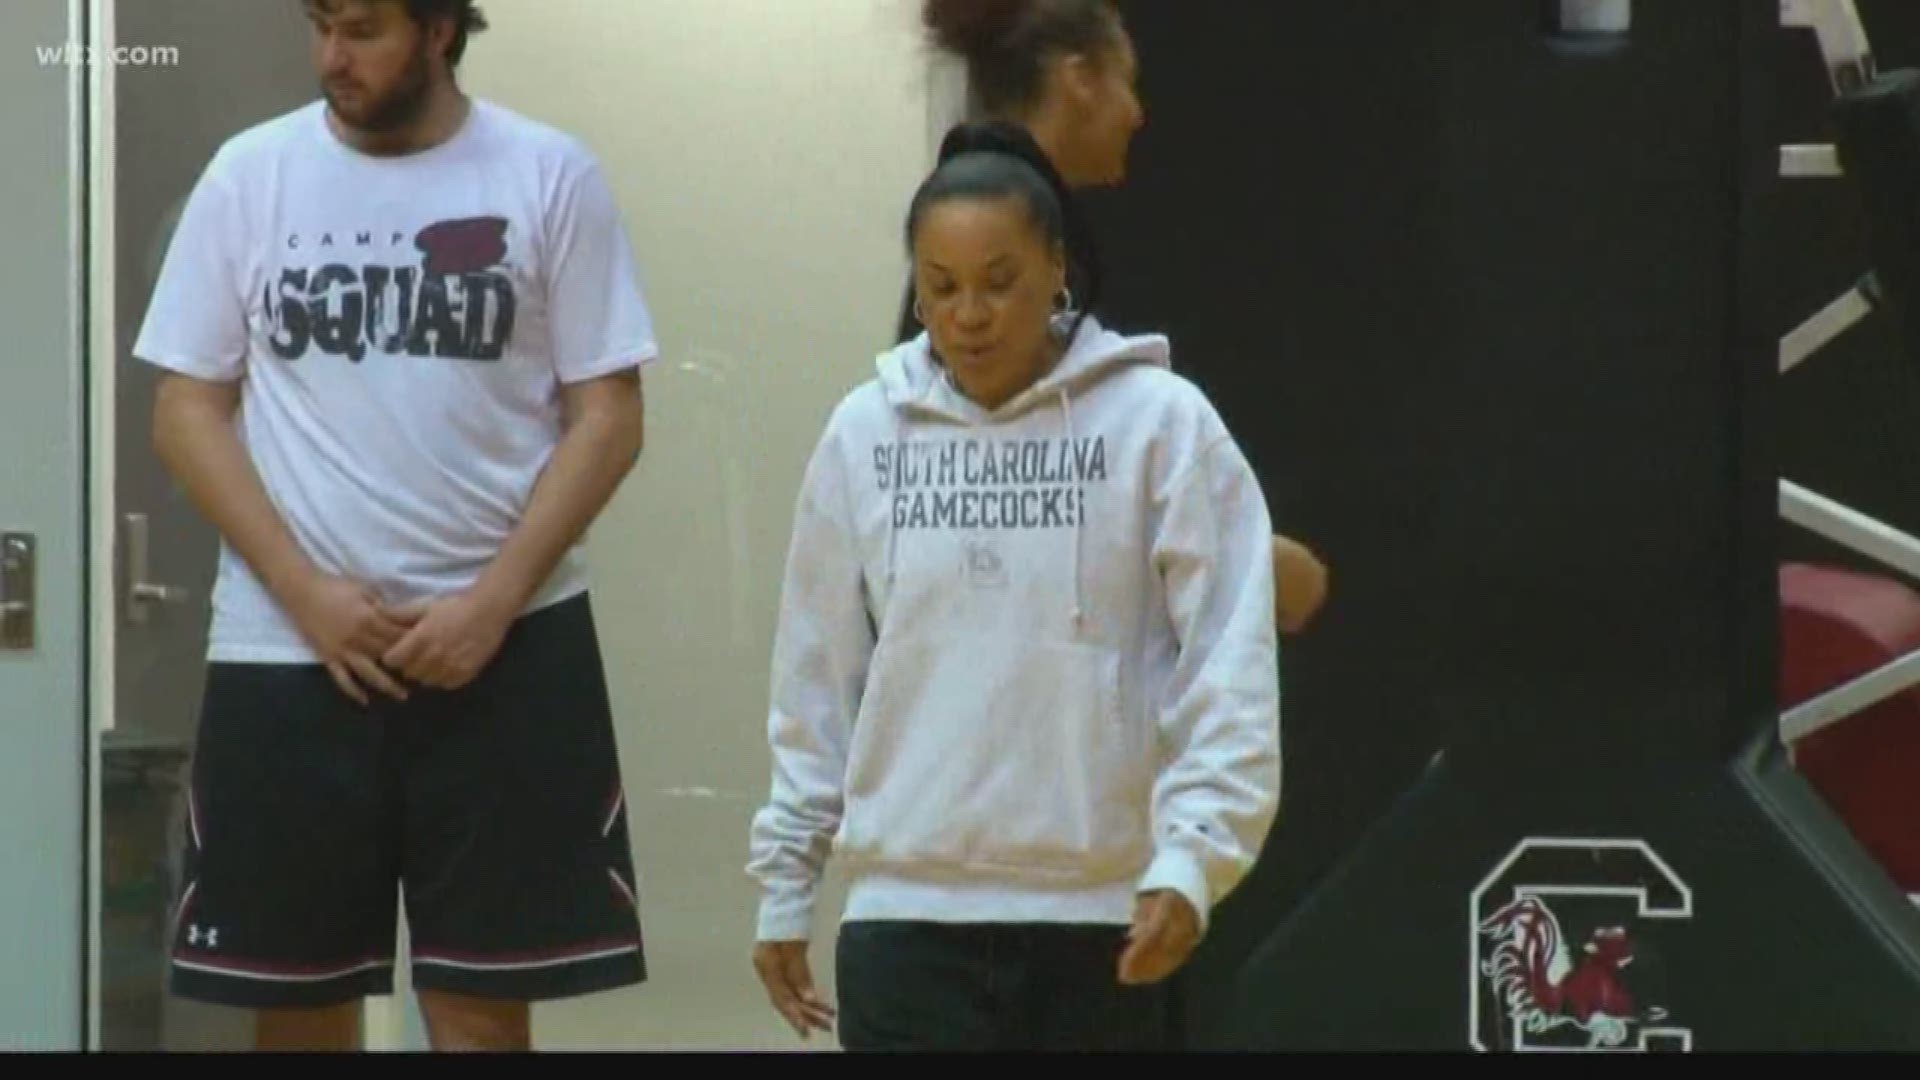 When Virginia comes calling, USC head coach Dawn Staley can point to her comments on the record stating "I have no interest in Virginia".